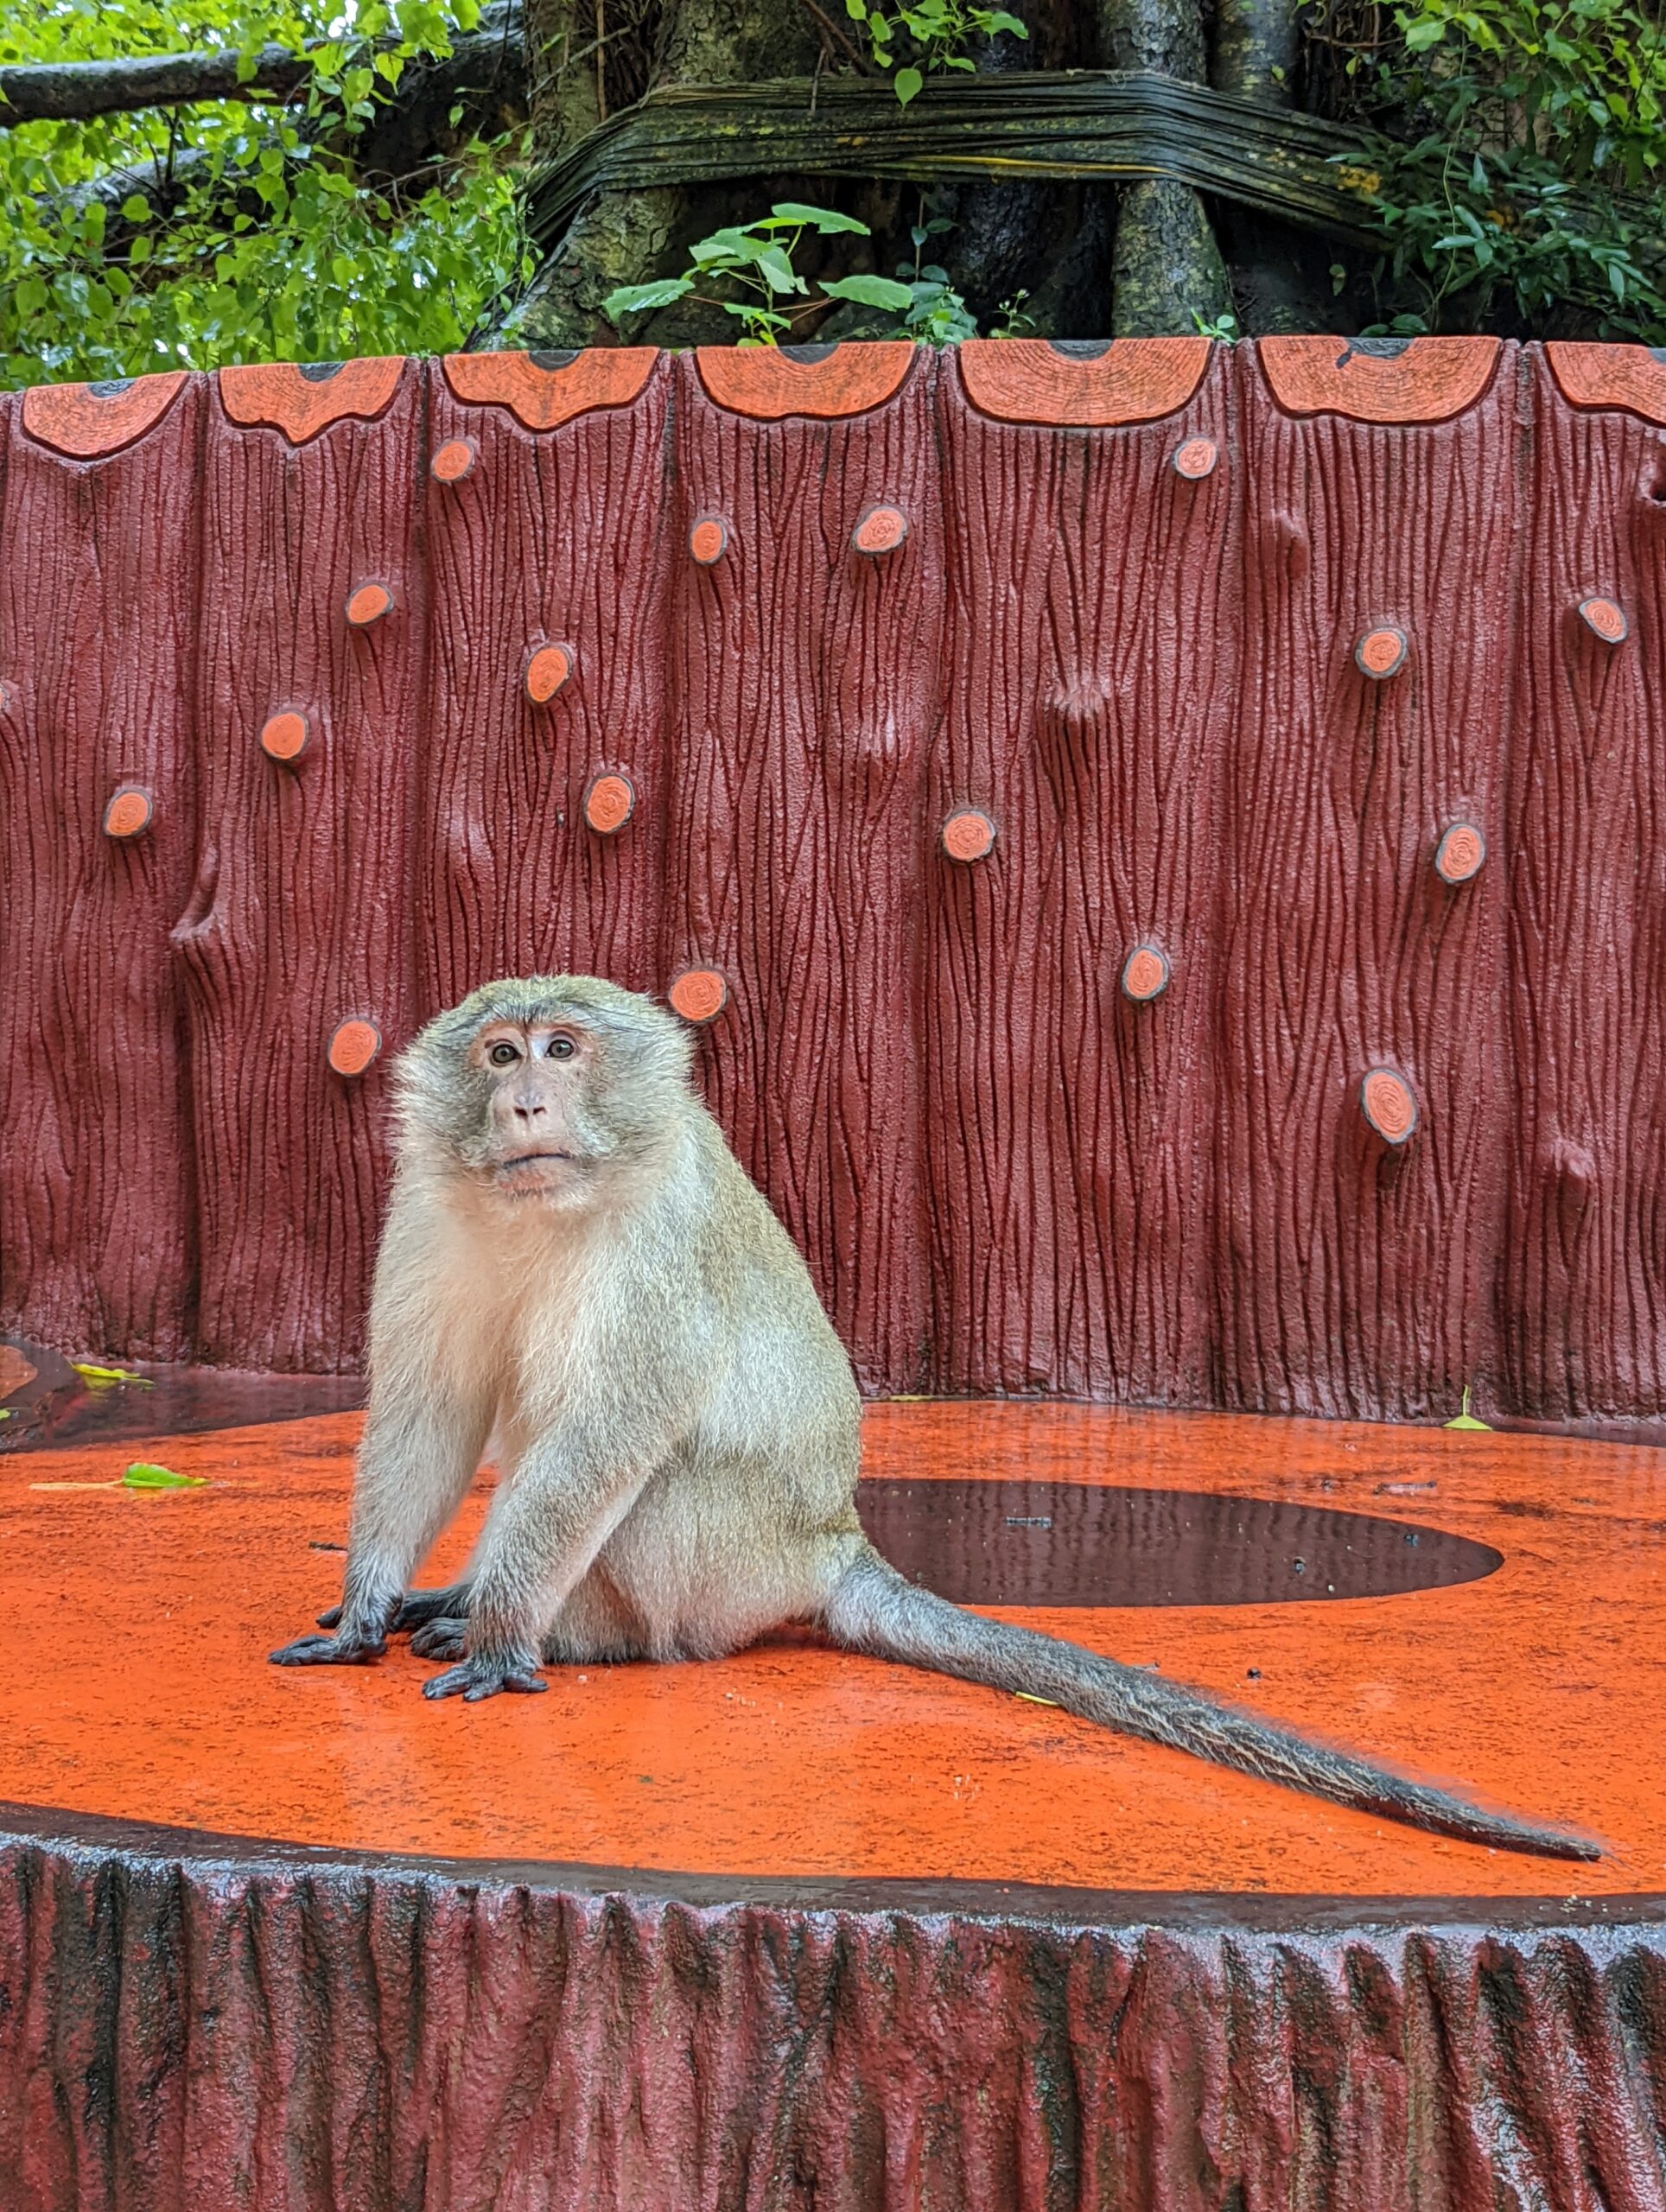 A Day Out In Monkey City, Lopburi, Thailand